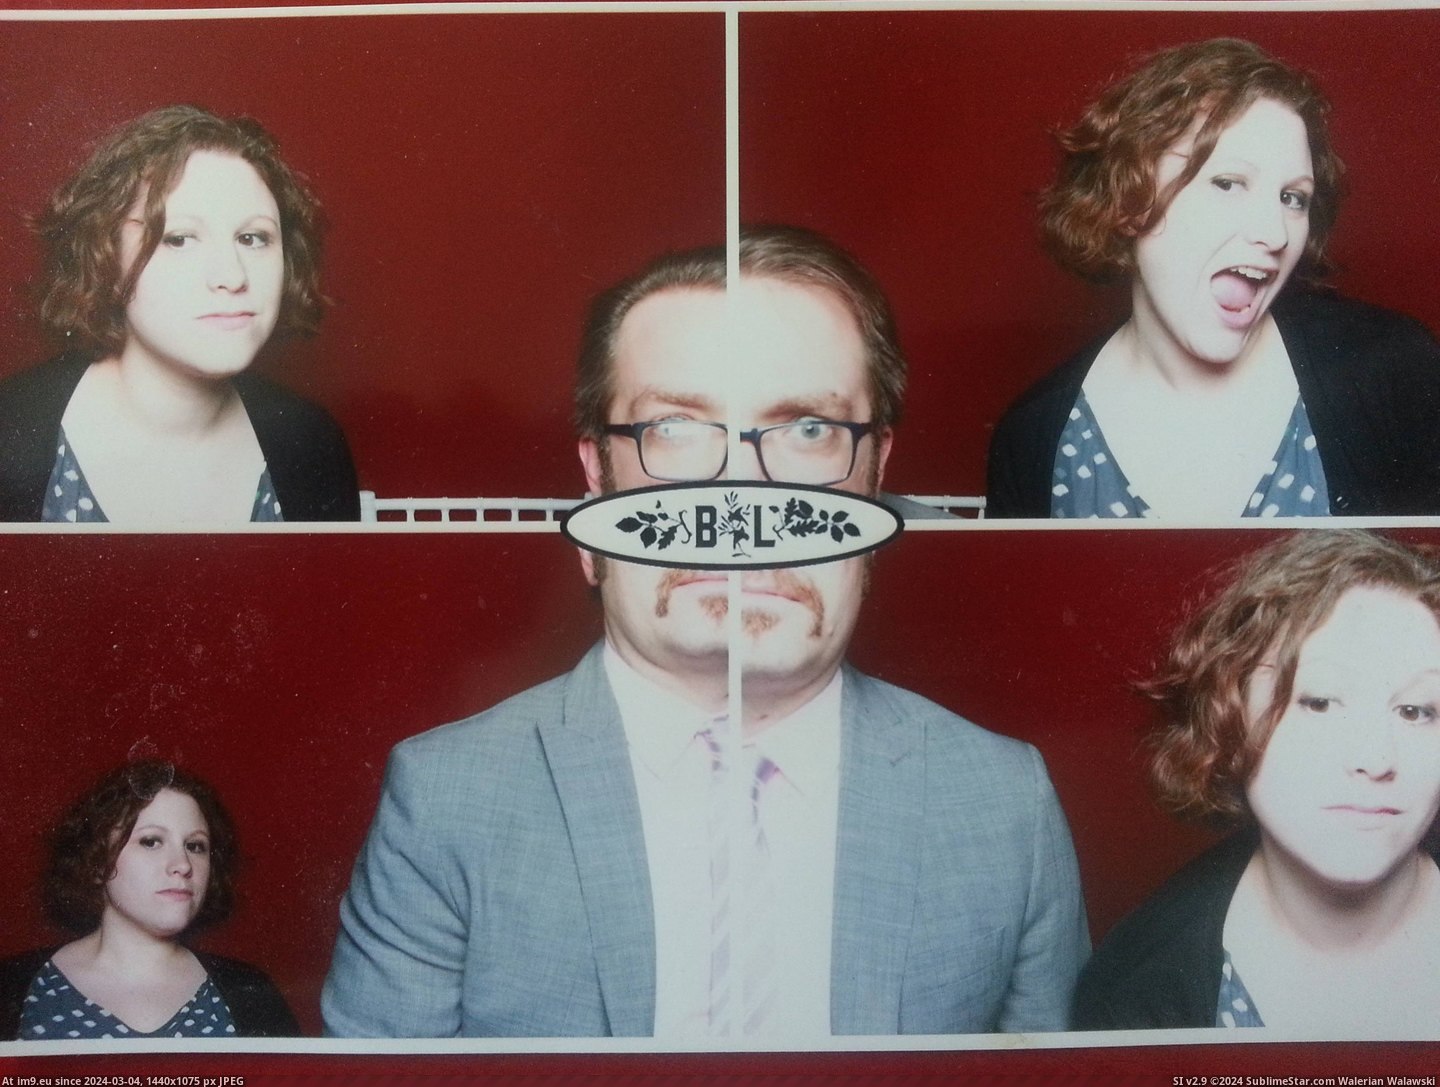 #Series #Wedding #Photobooth #Code #Cracked [Pics] There was a photobooth at a wedding that took a series of four. I cracked the code. Pic. (Image of album My r/PICS favs))